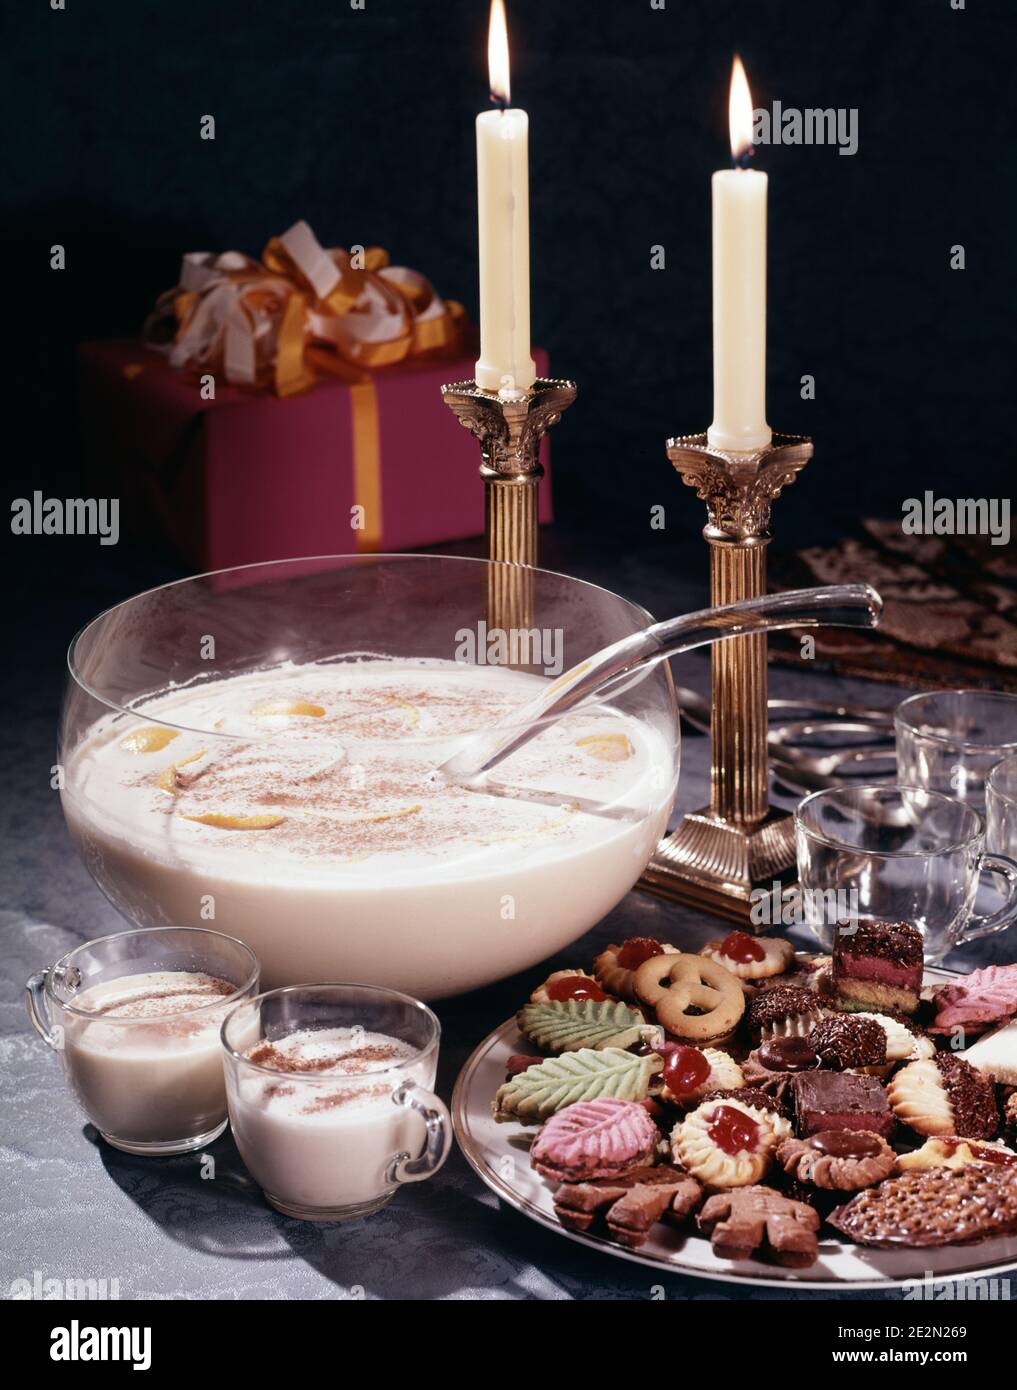 1980s CUPS LADLE AND BOWL OF CHRISTMAS EGGNOG BEVERAGE WITH PLATE OF SUGAR COOKIES LIT CANDLES AND A WRAPPED PRESENT - kx9988 DAS001 HARS DECEMBER DECEMBER 25 STILL LIFE BOURBON RUM PUNCH BOWL WHISKY BEVERAGES FESTIVE JANUARY 1 LIGHTED NEW YEAR NEW YEARS OLD FASHIONED Stock Photo